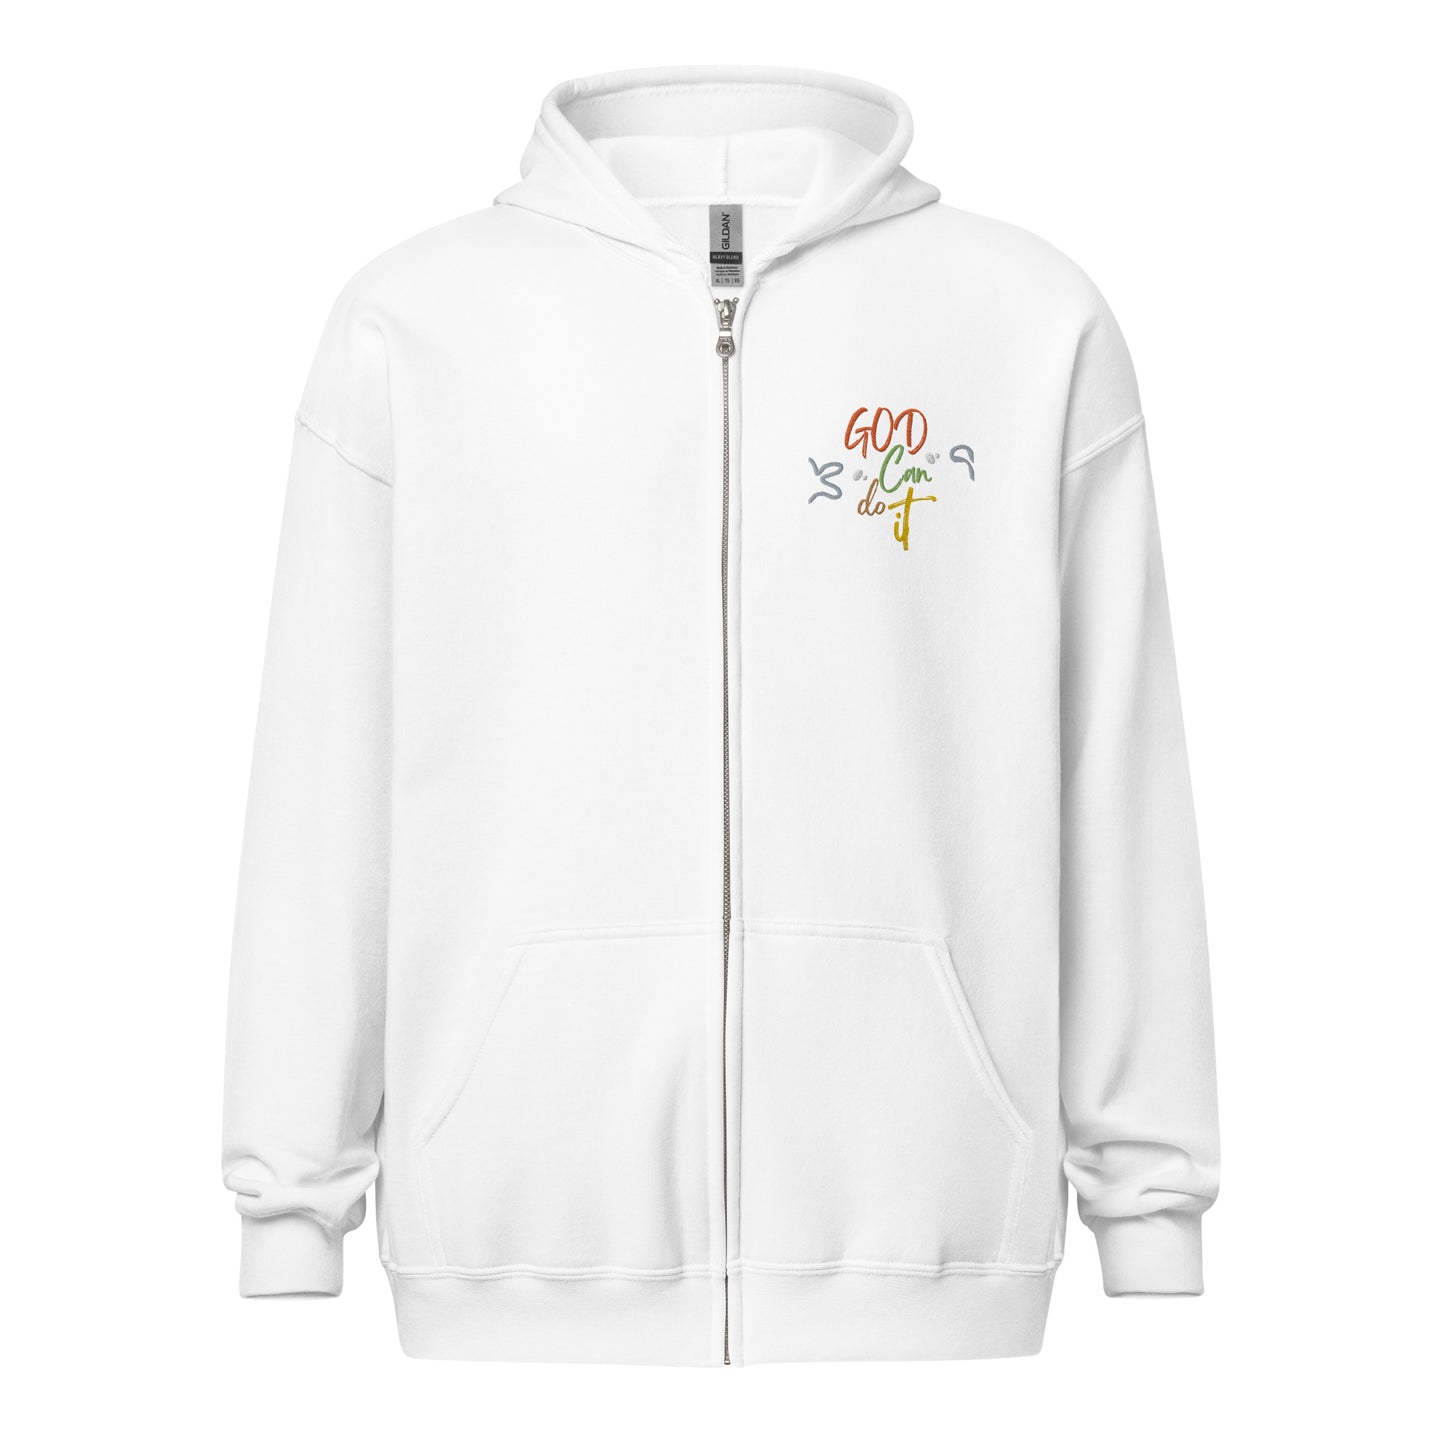 GOD Can Do It - Embroidered Unisex heavy blend zip hoodie